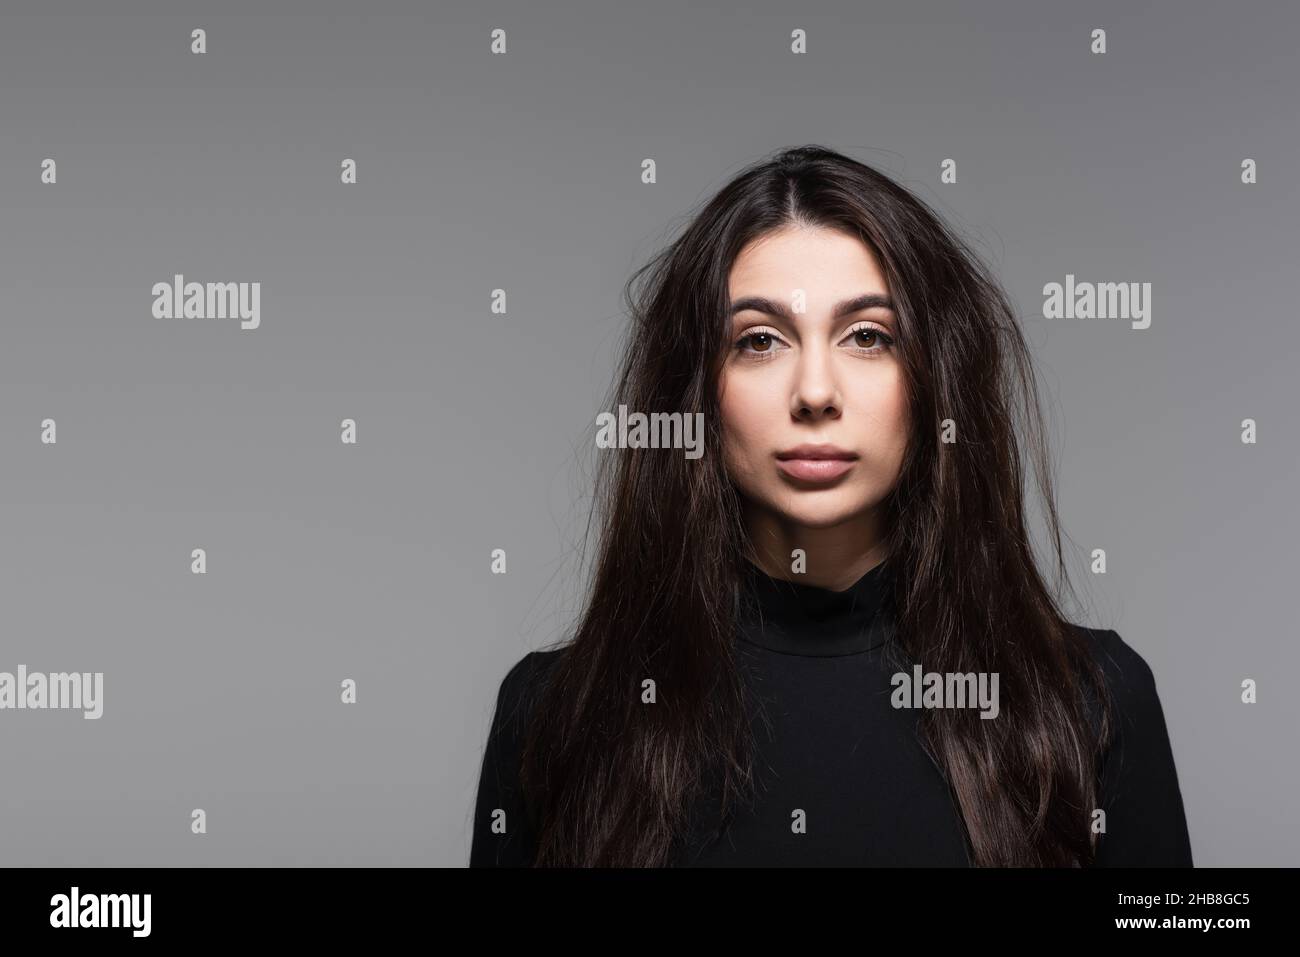 young woman in black turtleneck with tousled hair isolated on grey Stock Photo